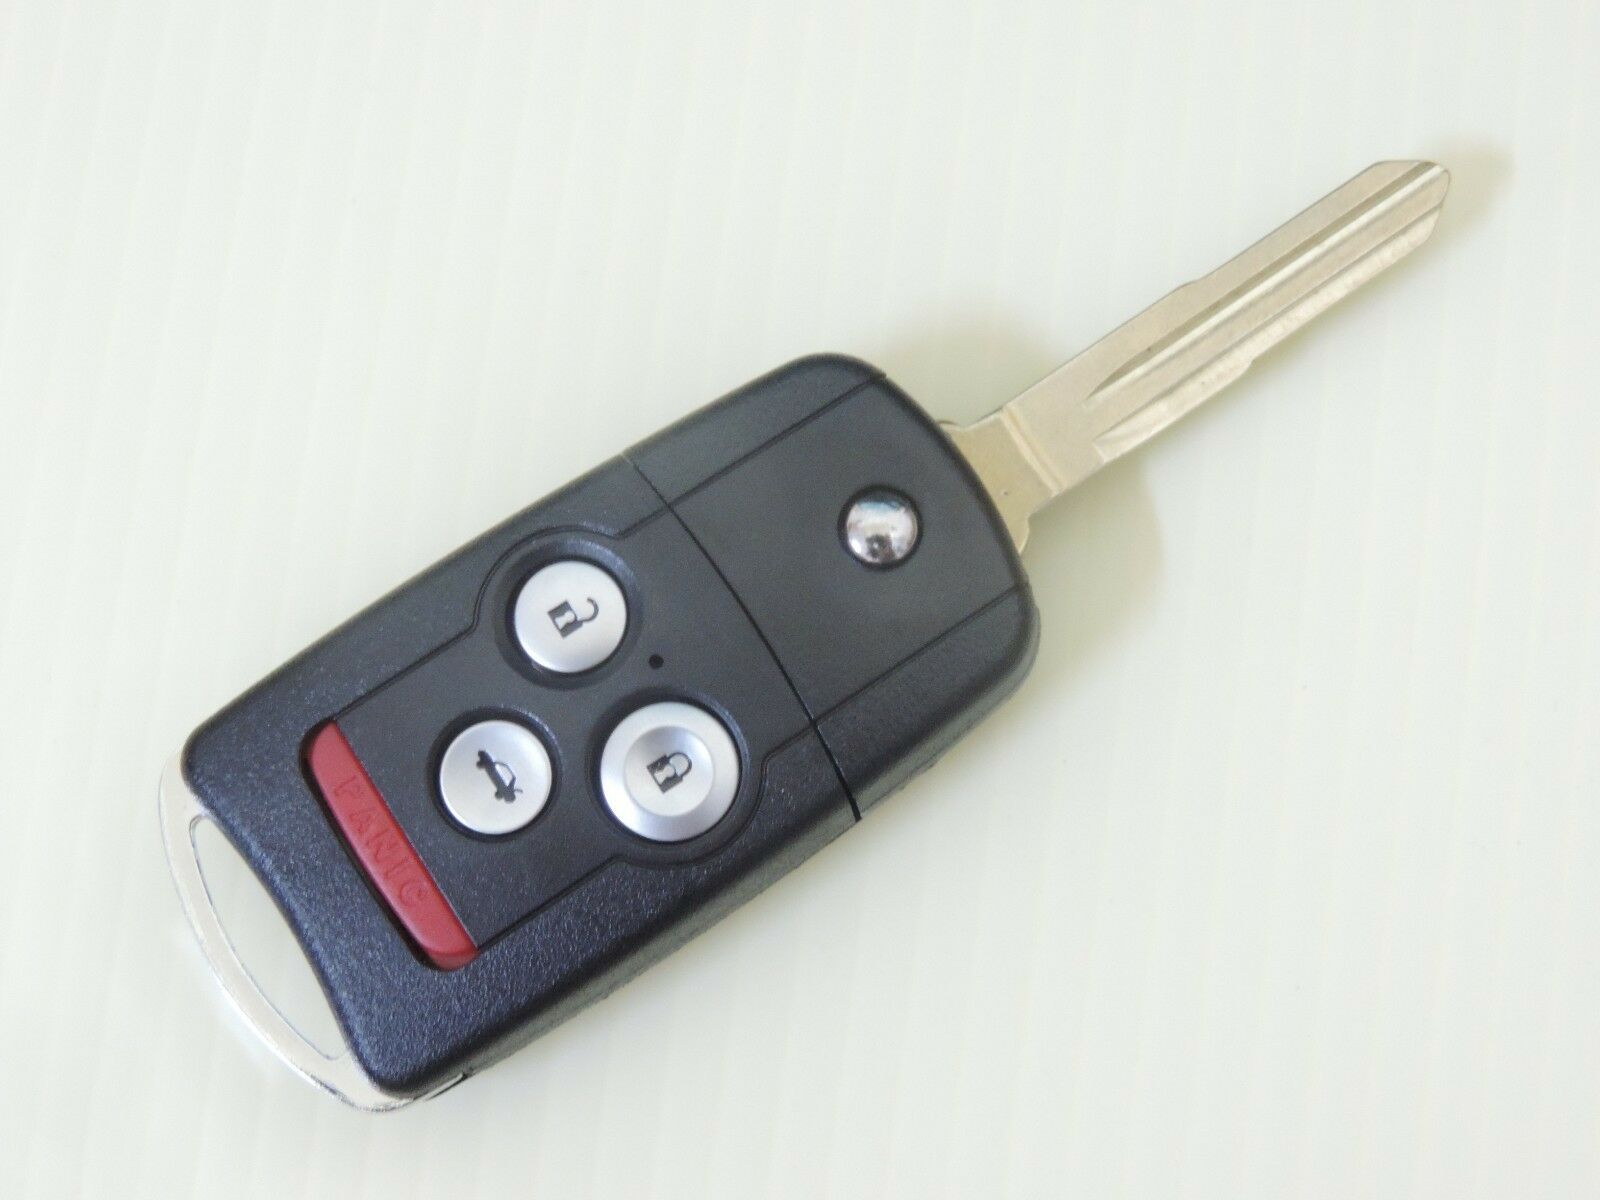 New Flip Switch Remote Key Fob For The Acura 2004 2007 - Family Car , HD Wallpaper & Backgrounds